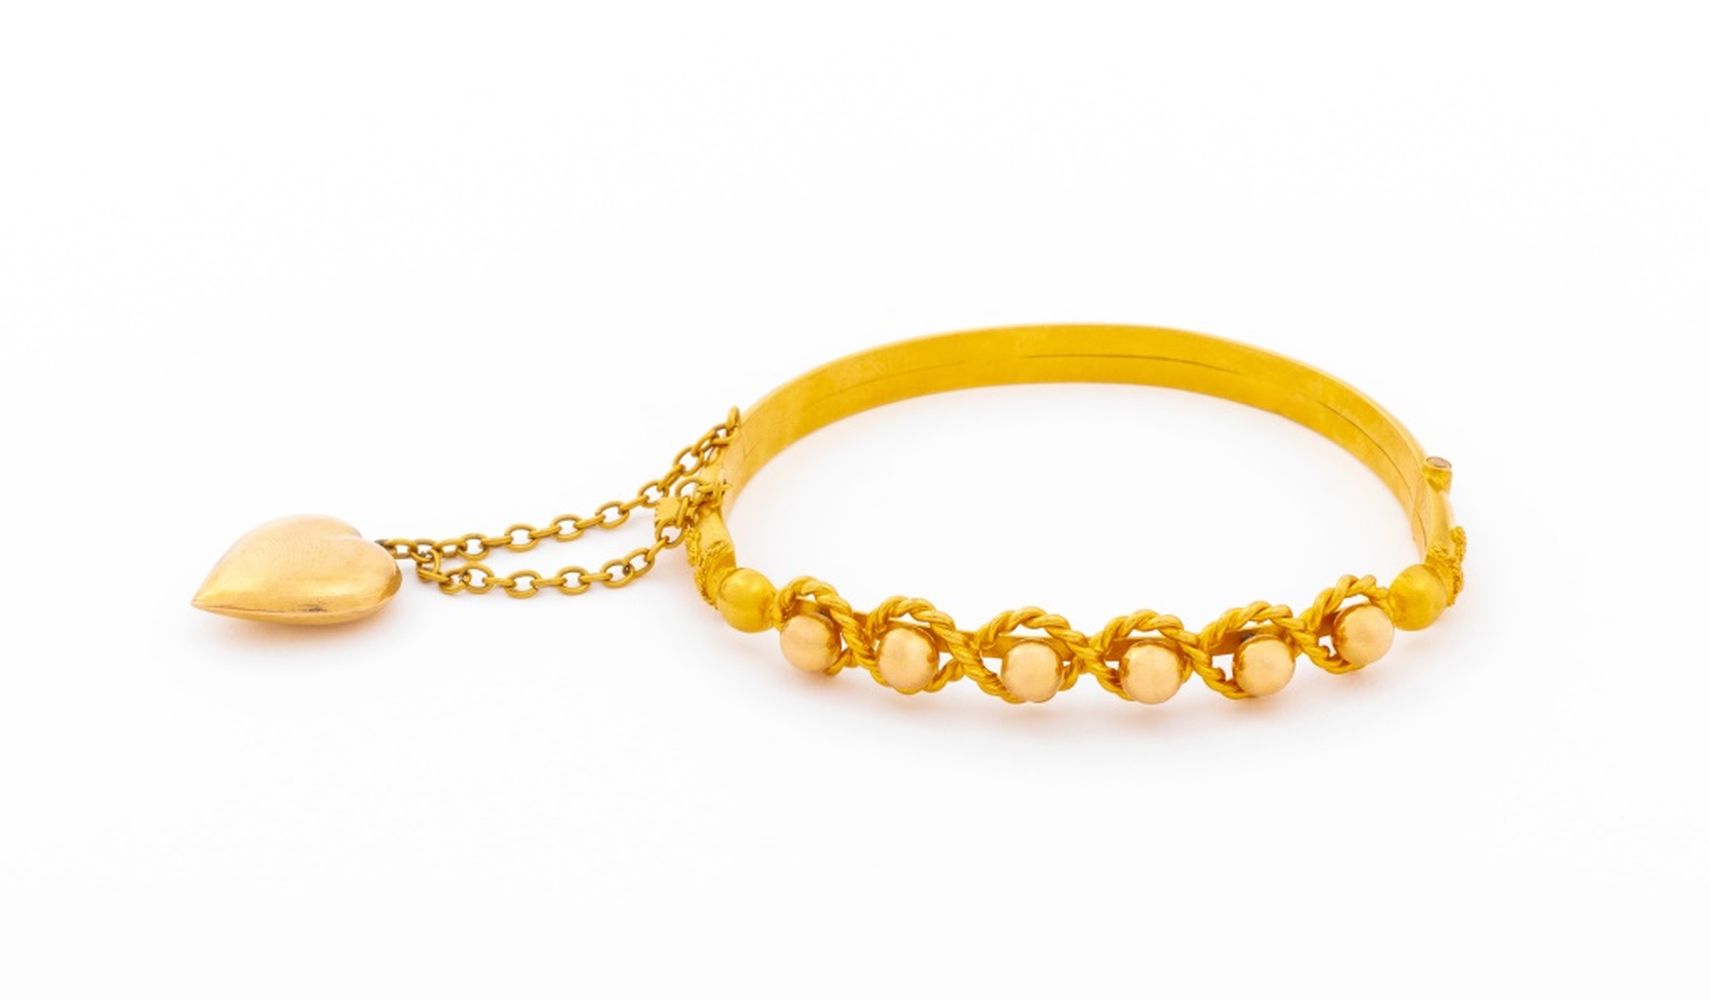 22K YELLOW GOLD BANGLE WITH HEART